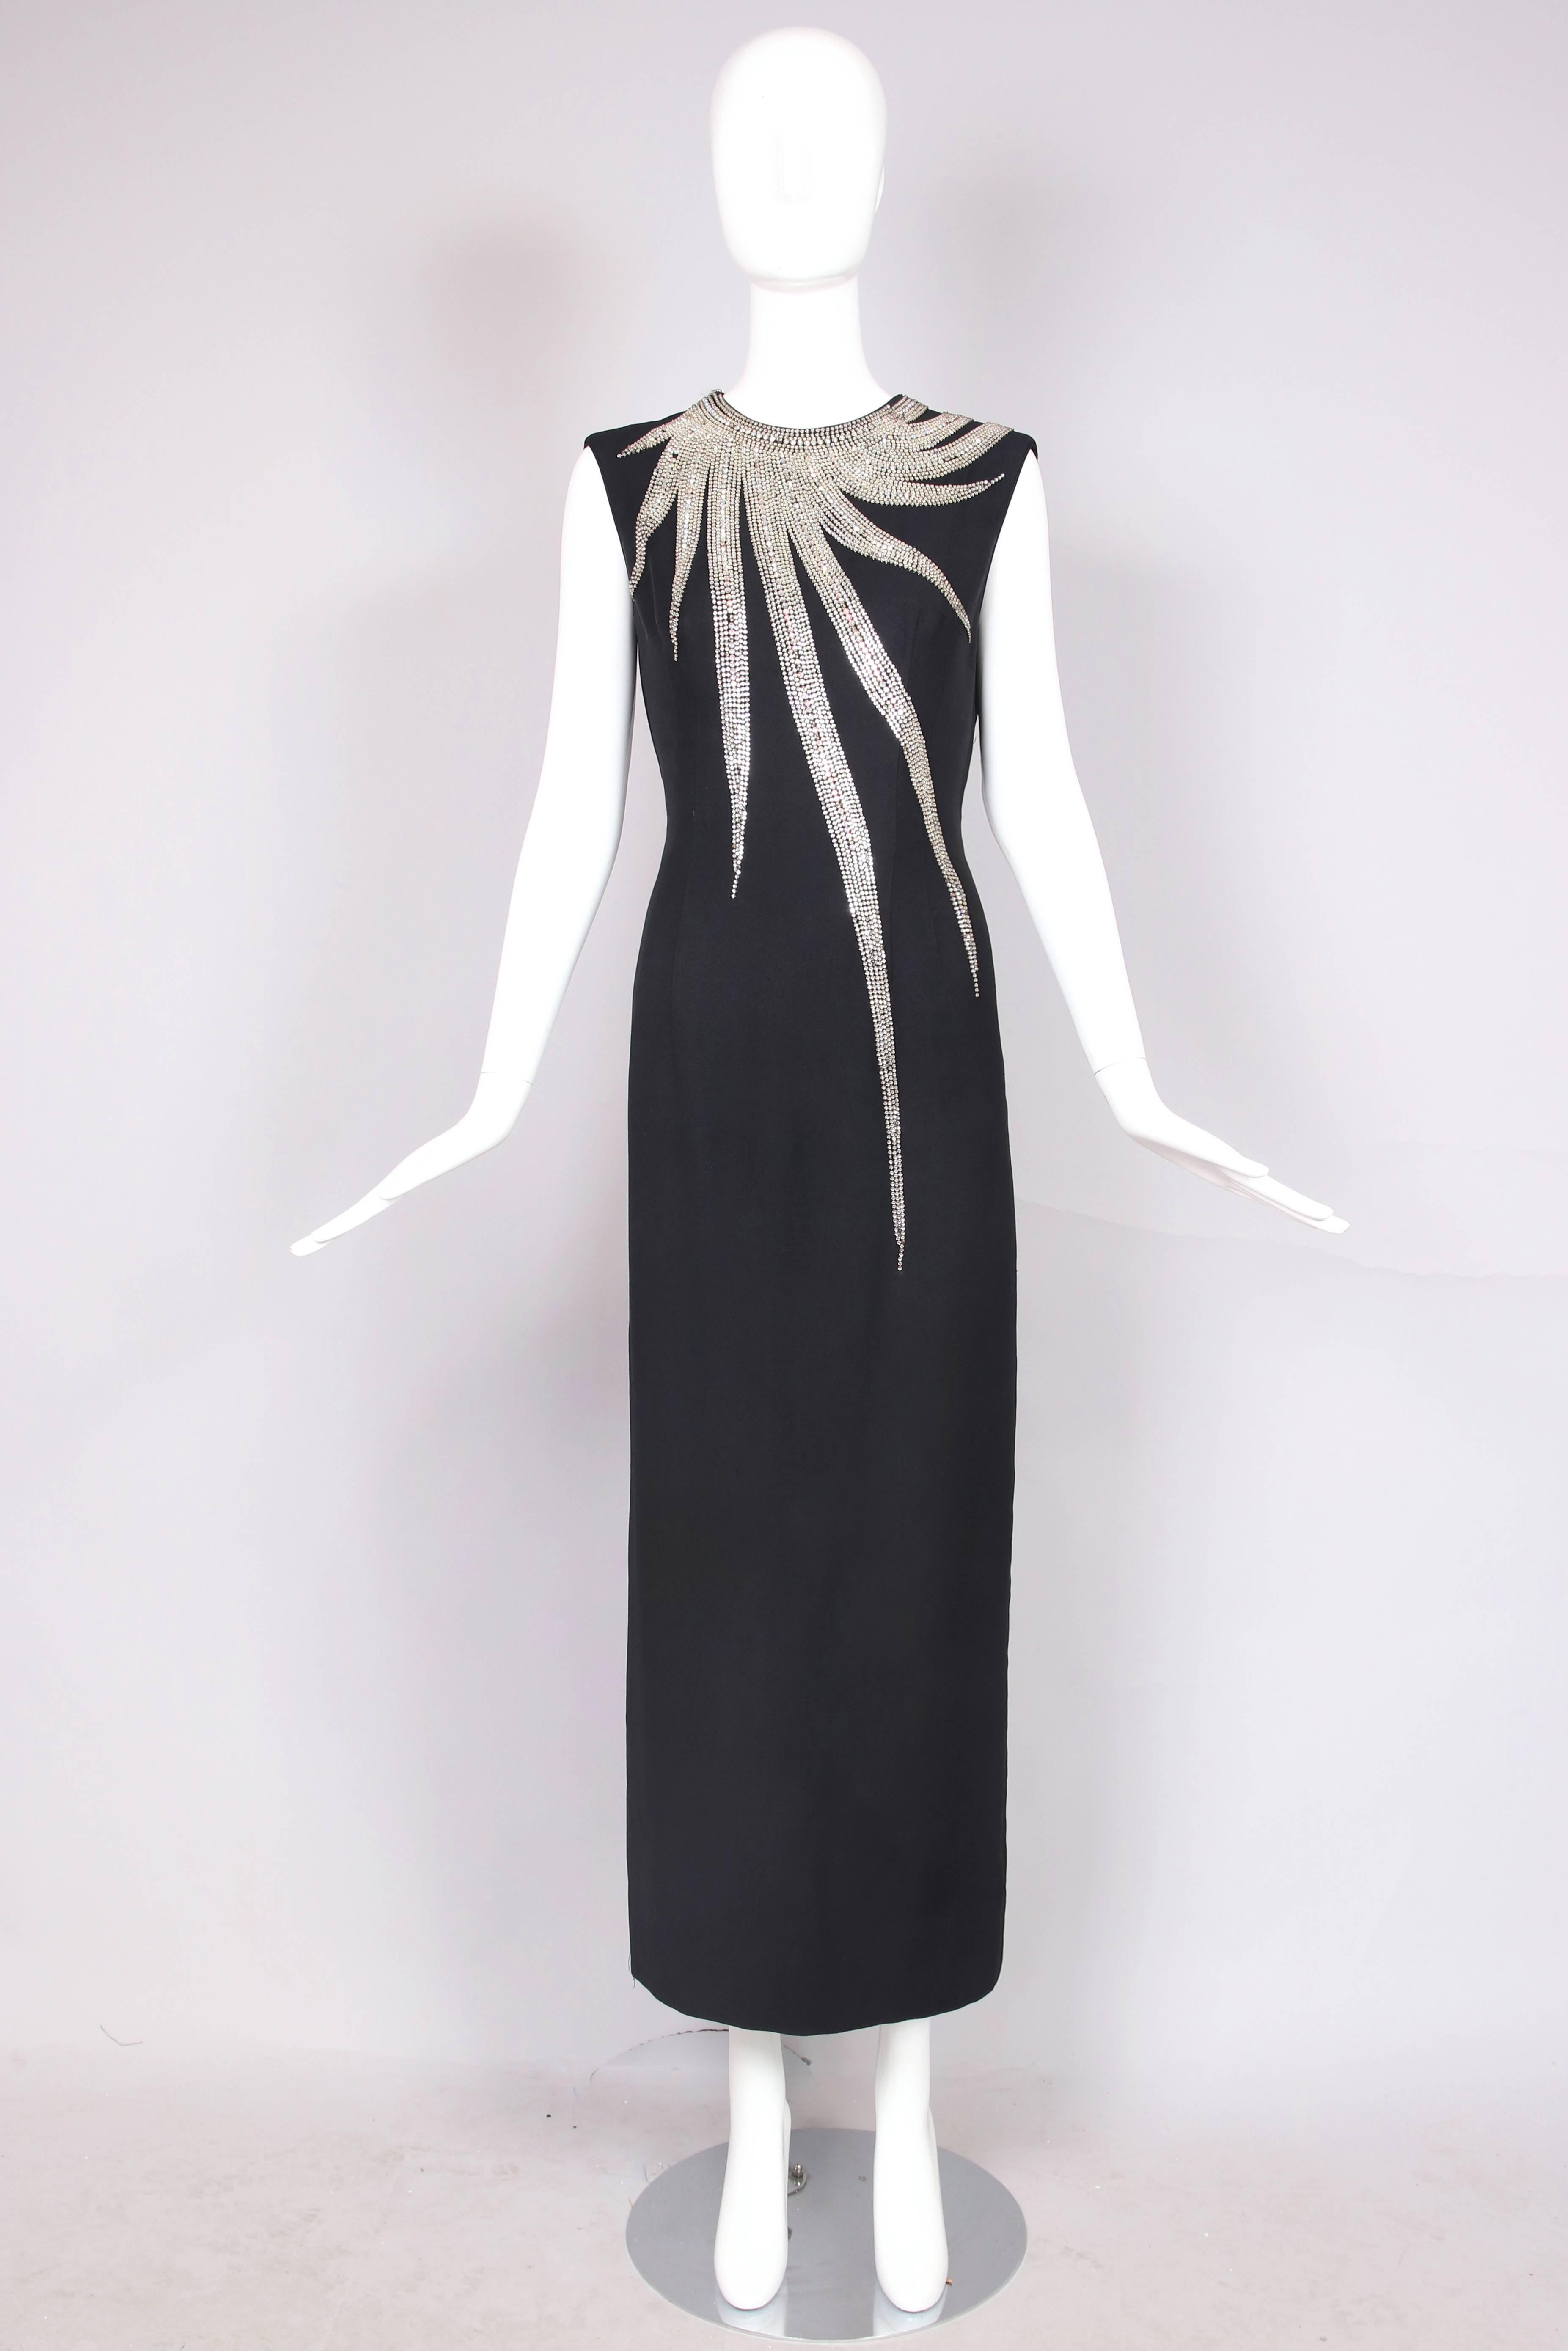 1960's Mr. Blackwell black crepe sleeveless evening gown with frontal asymmetric jeweled sunburst design detail and with slit at back hem. Fully lined. In very good condition with scattered bead loss, some light and some more noticeable - a tailor